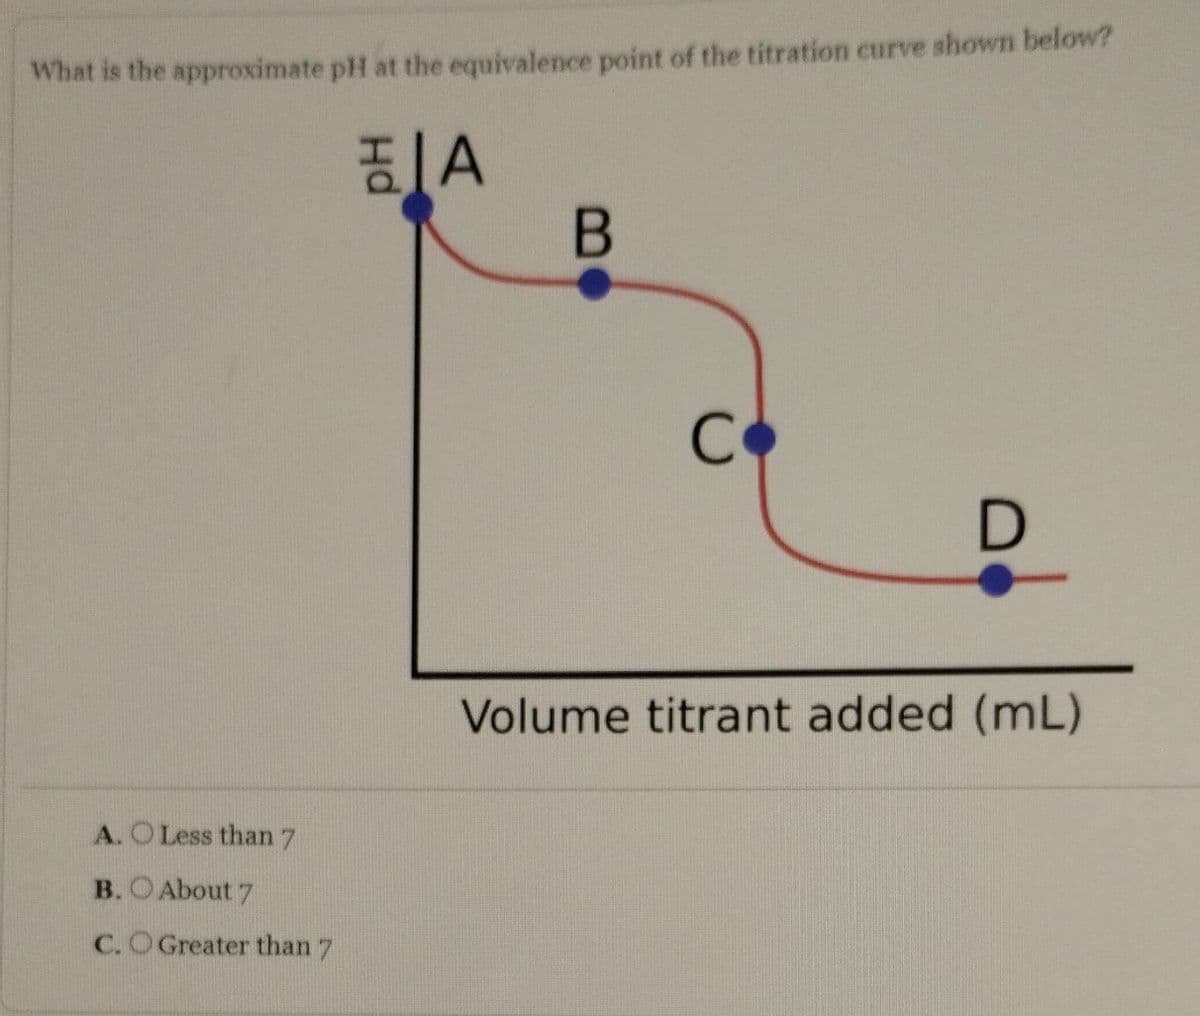 What is the approximate pH at the equivalence point of the titration curve shown below?
A
B
A. O Less than 7
B. About 7
C. O Greater than 7
C
Volume titrant added (mL)